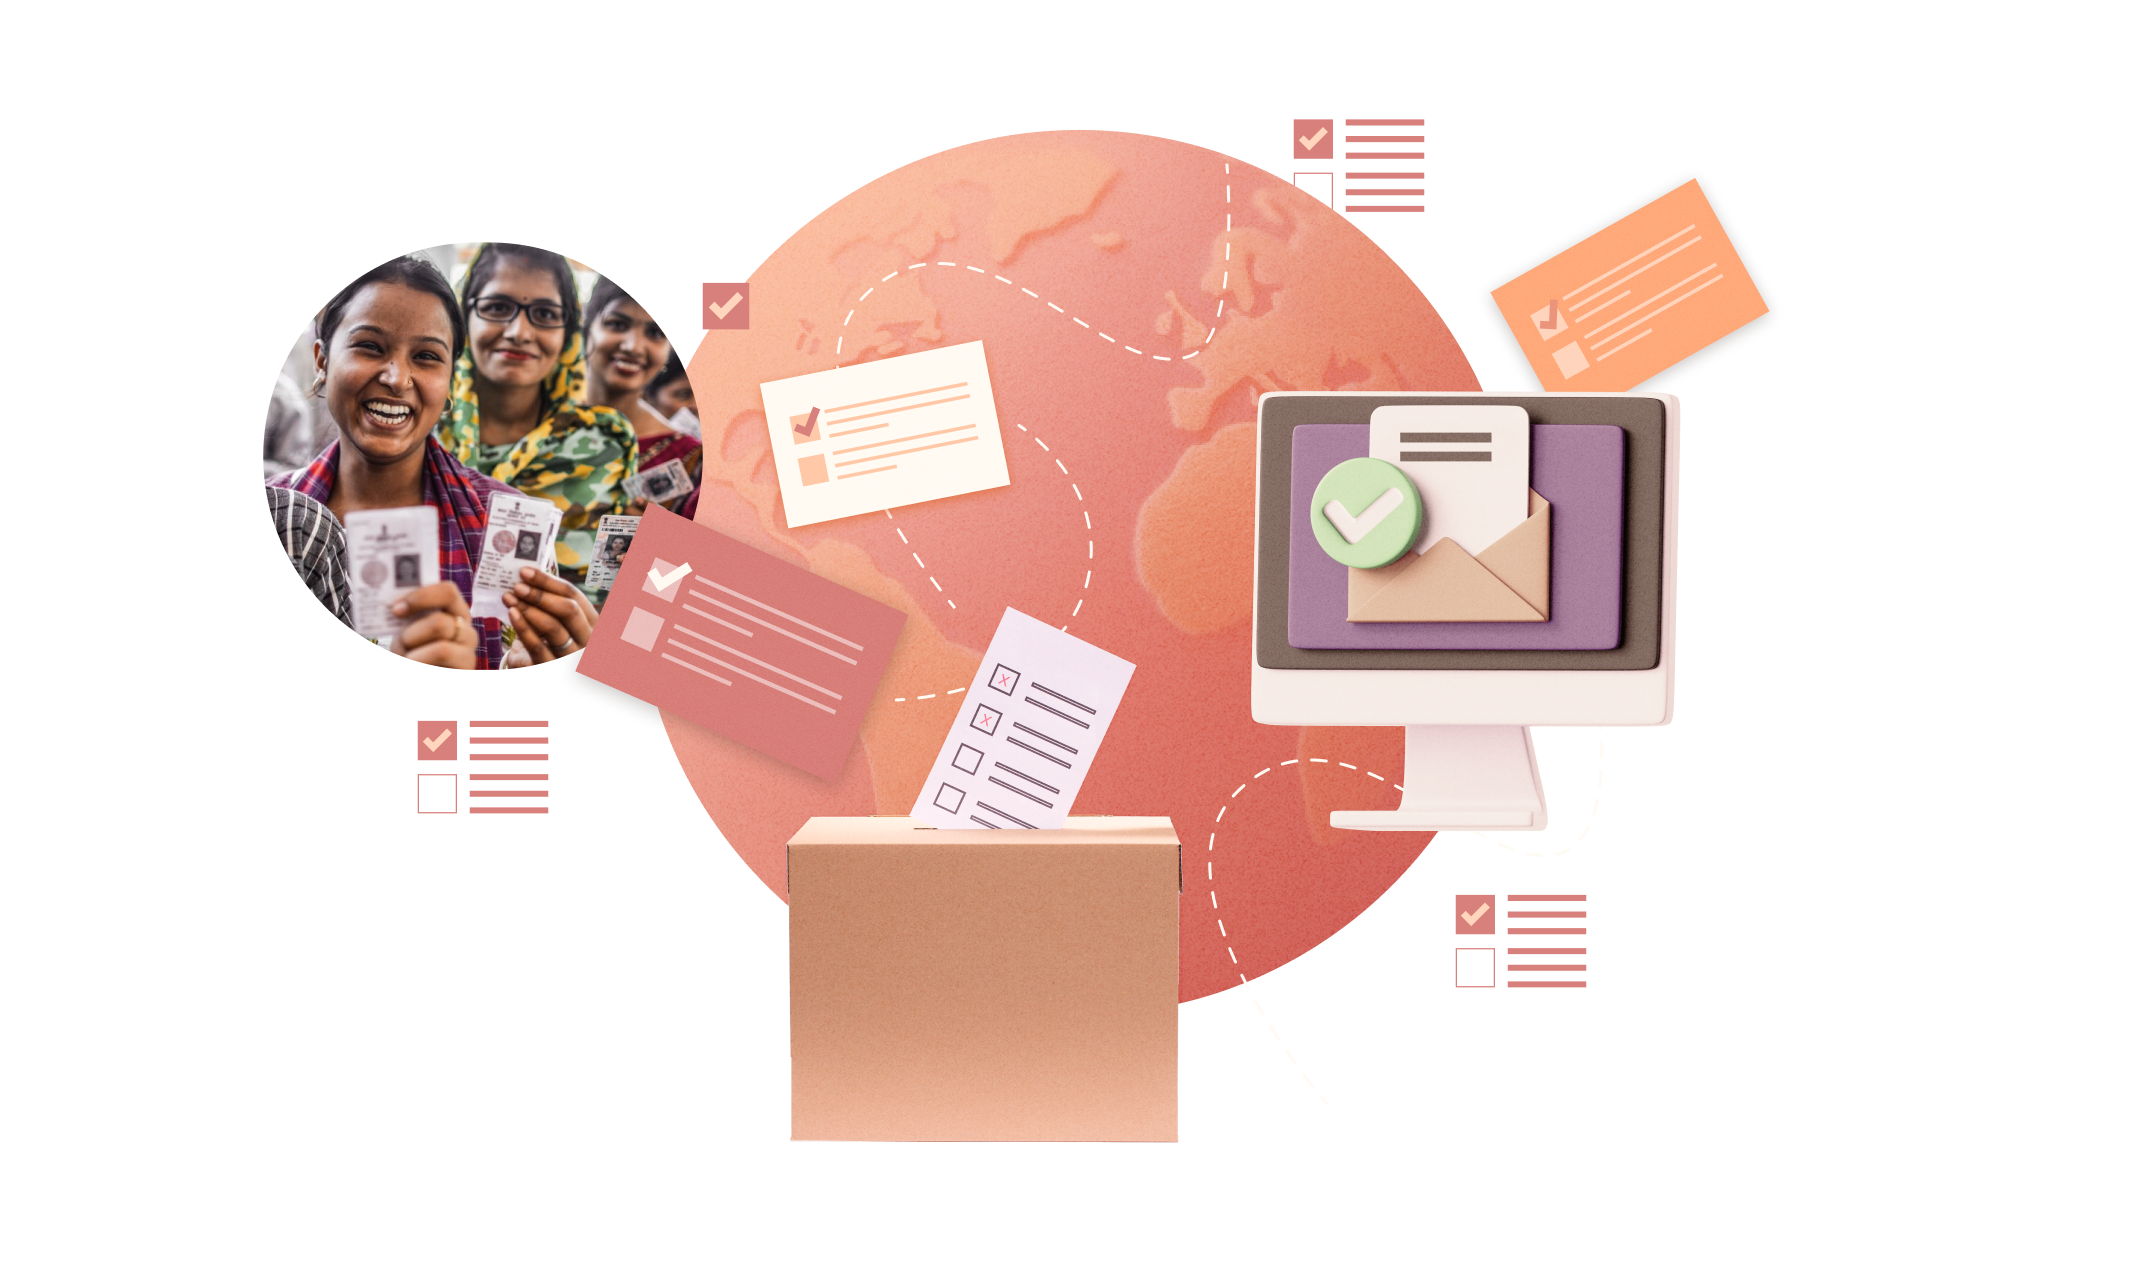 A collage of digital graphics and images to illustrate digitization strategies around the world.